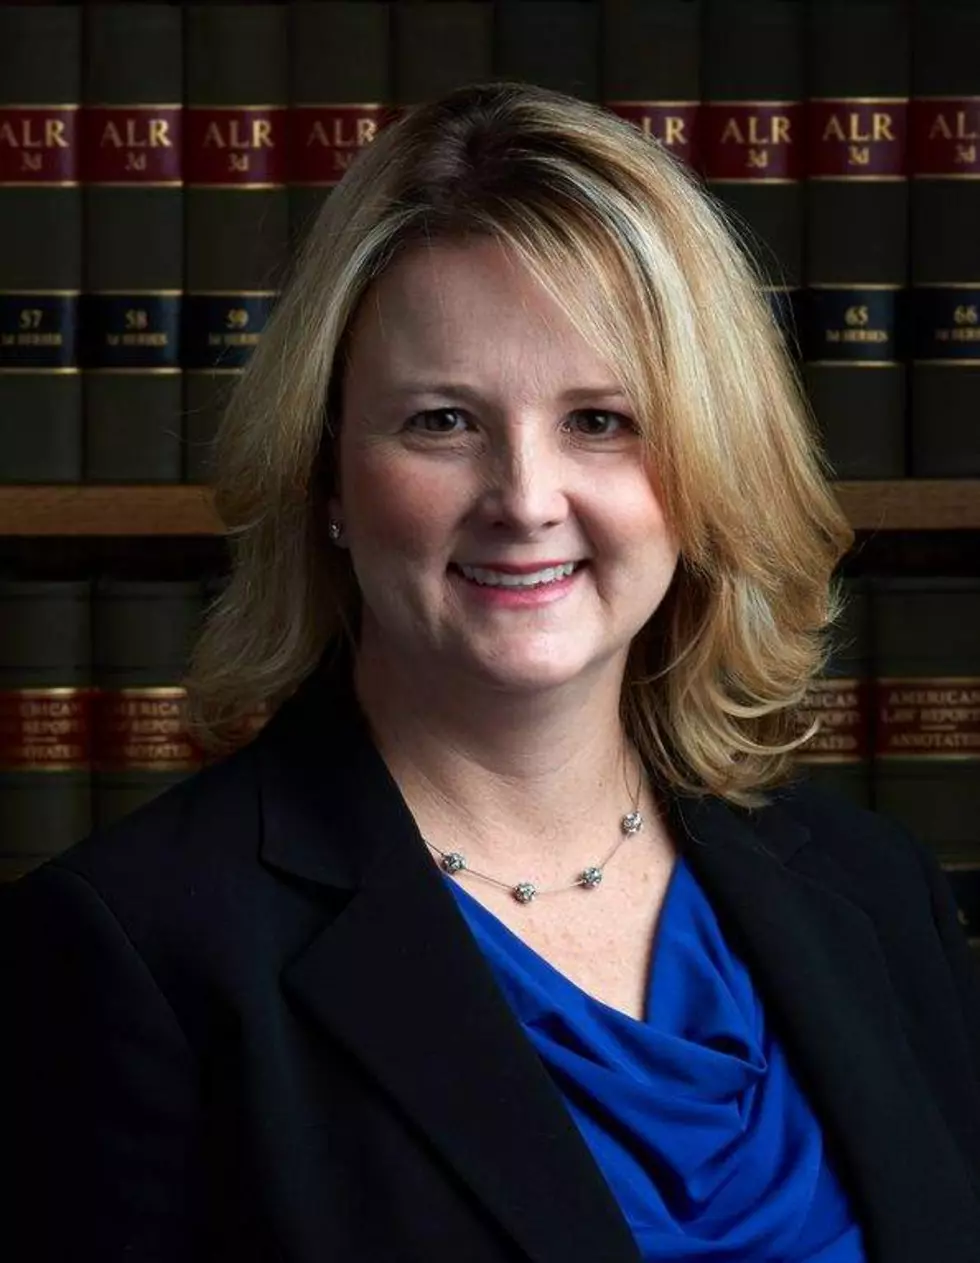 Lannerd to Fill Vacancy on 8th Circuit Bench